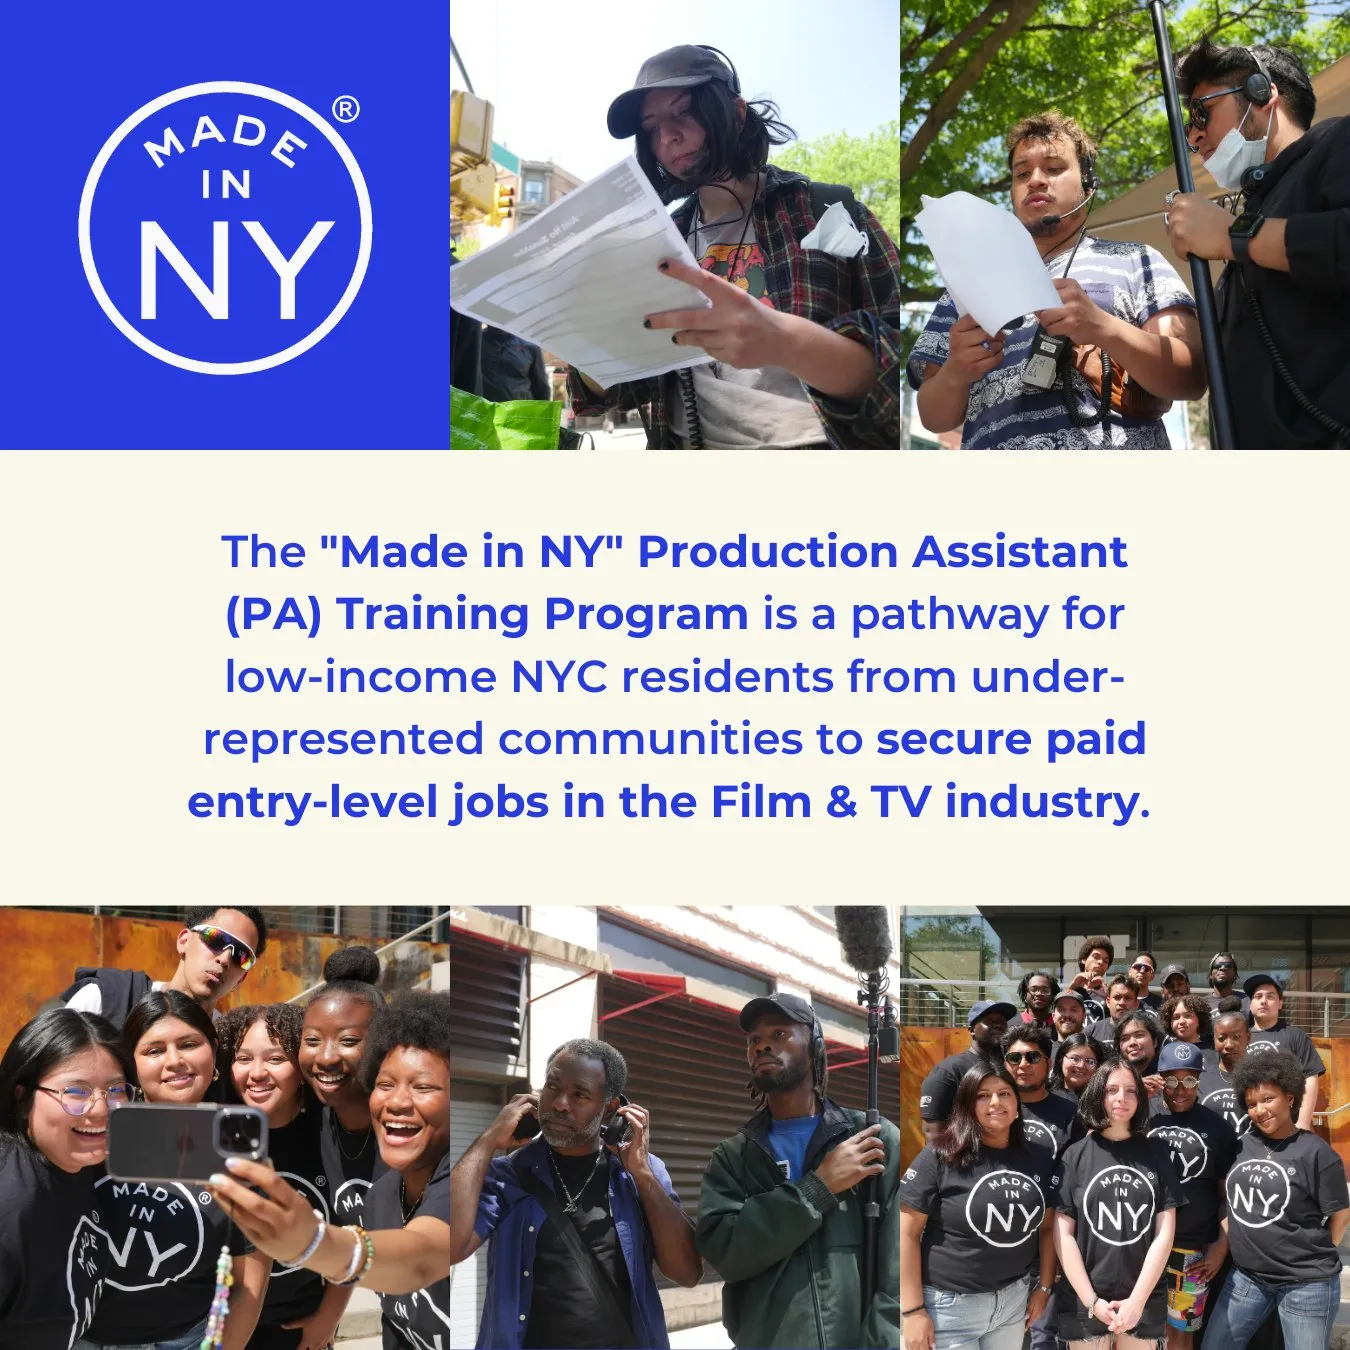 You are currently viewing “Made in NY” Production Assistant Training Program Creates Career Pathways for Low-Income, BIPOC, and Women in Film & TV Industry, New Study Shows